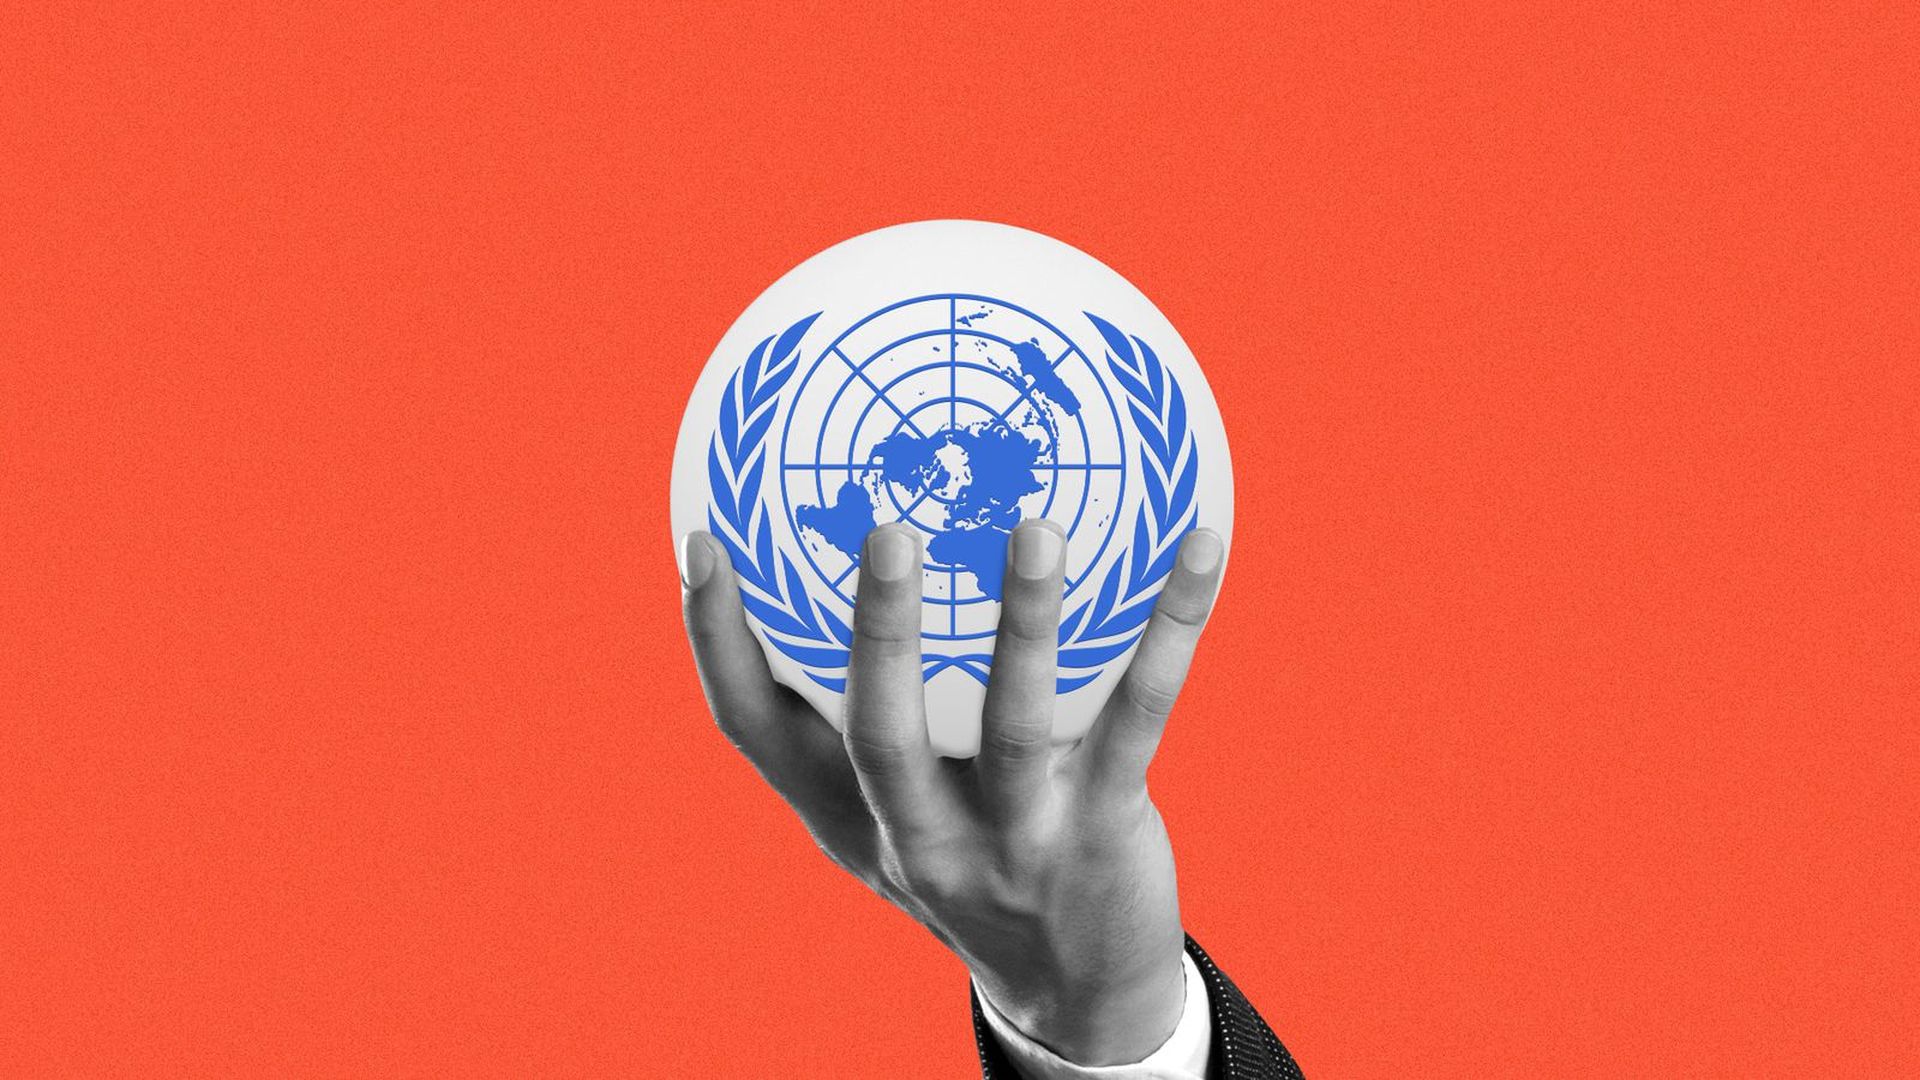 A hand holding the UN symbol